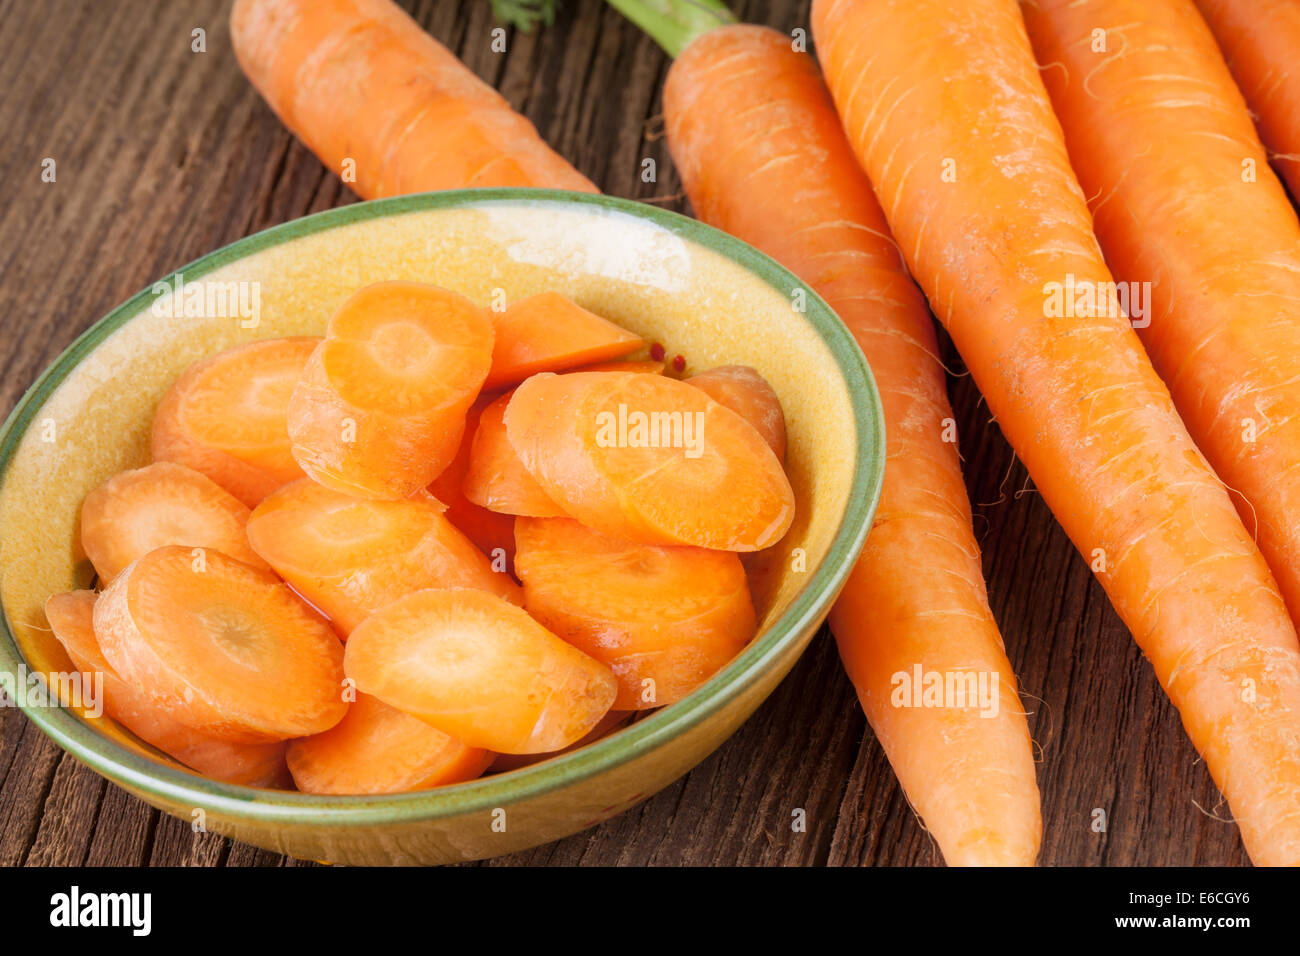 Carrots prepared for cooking Stock Photo